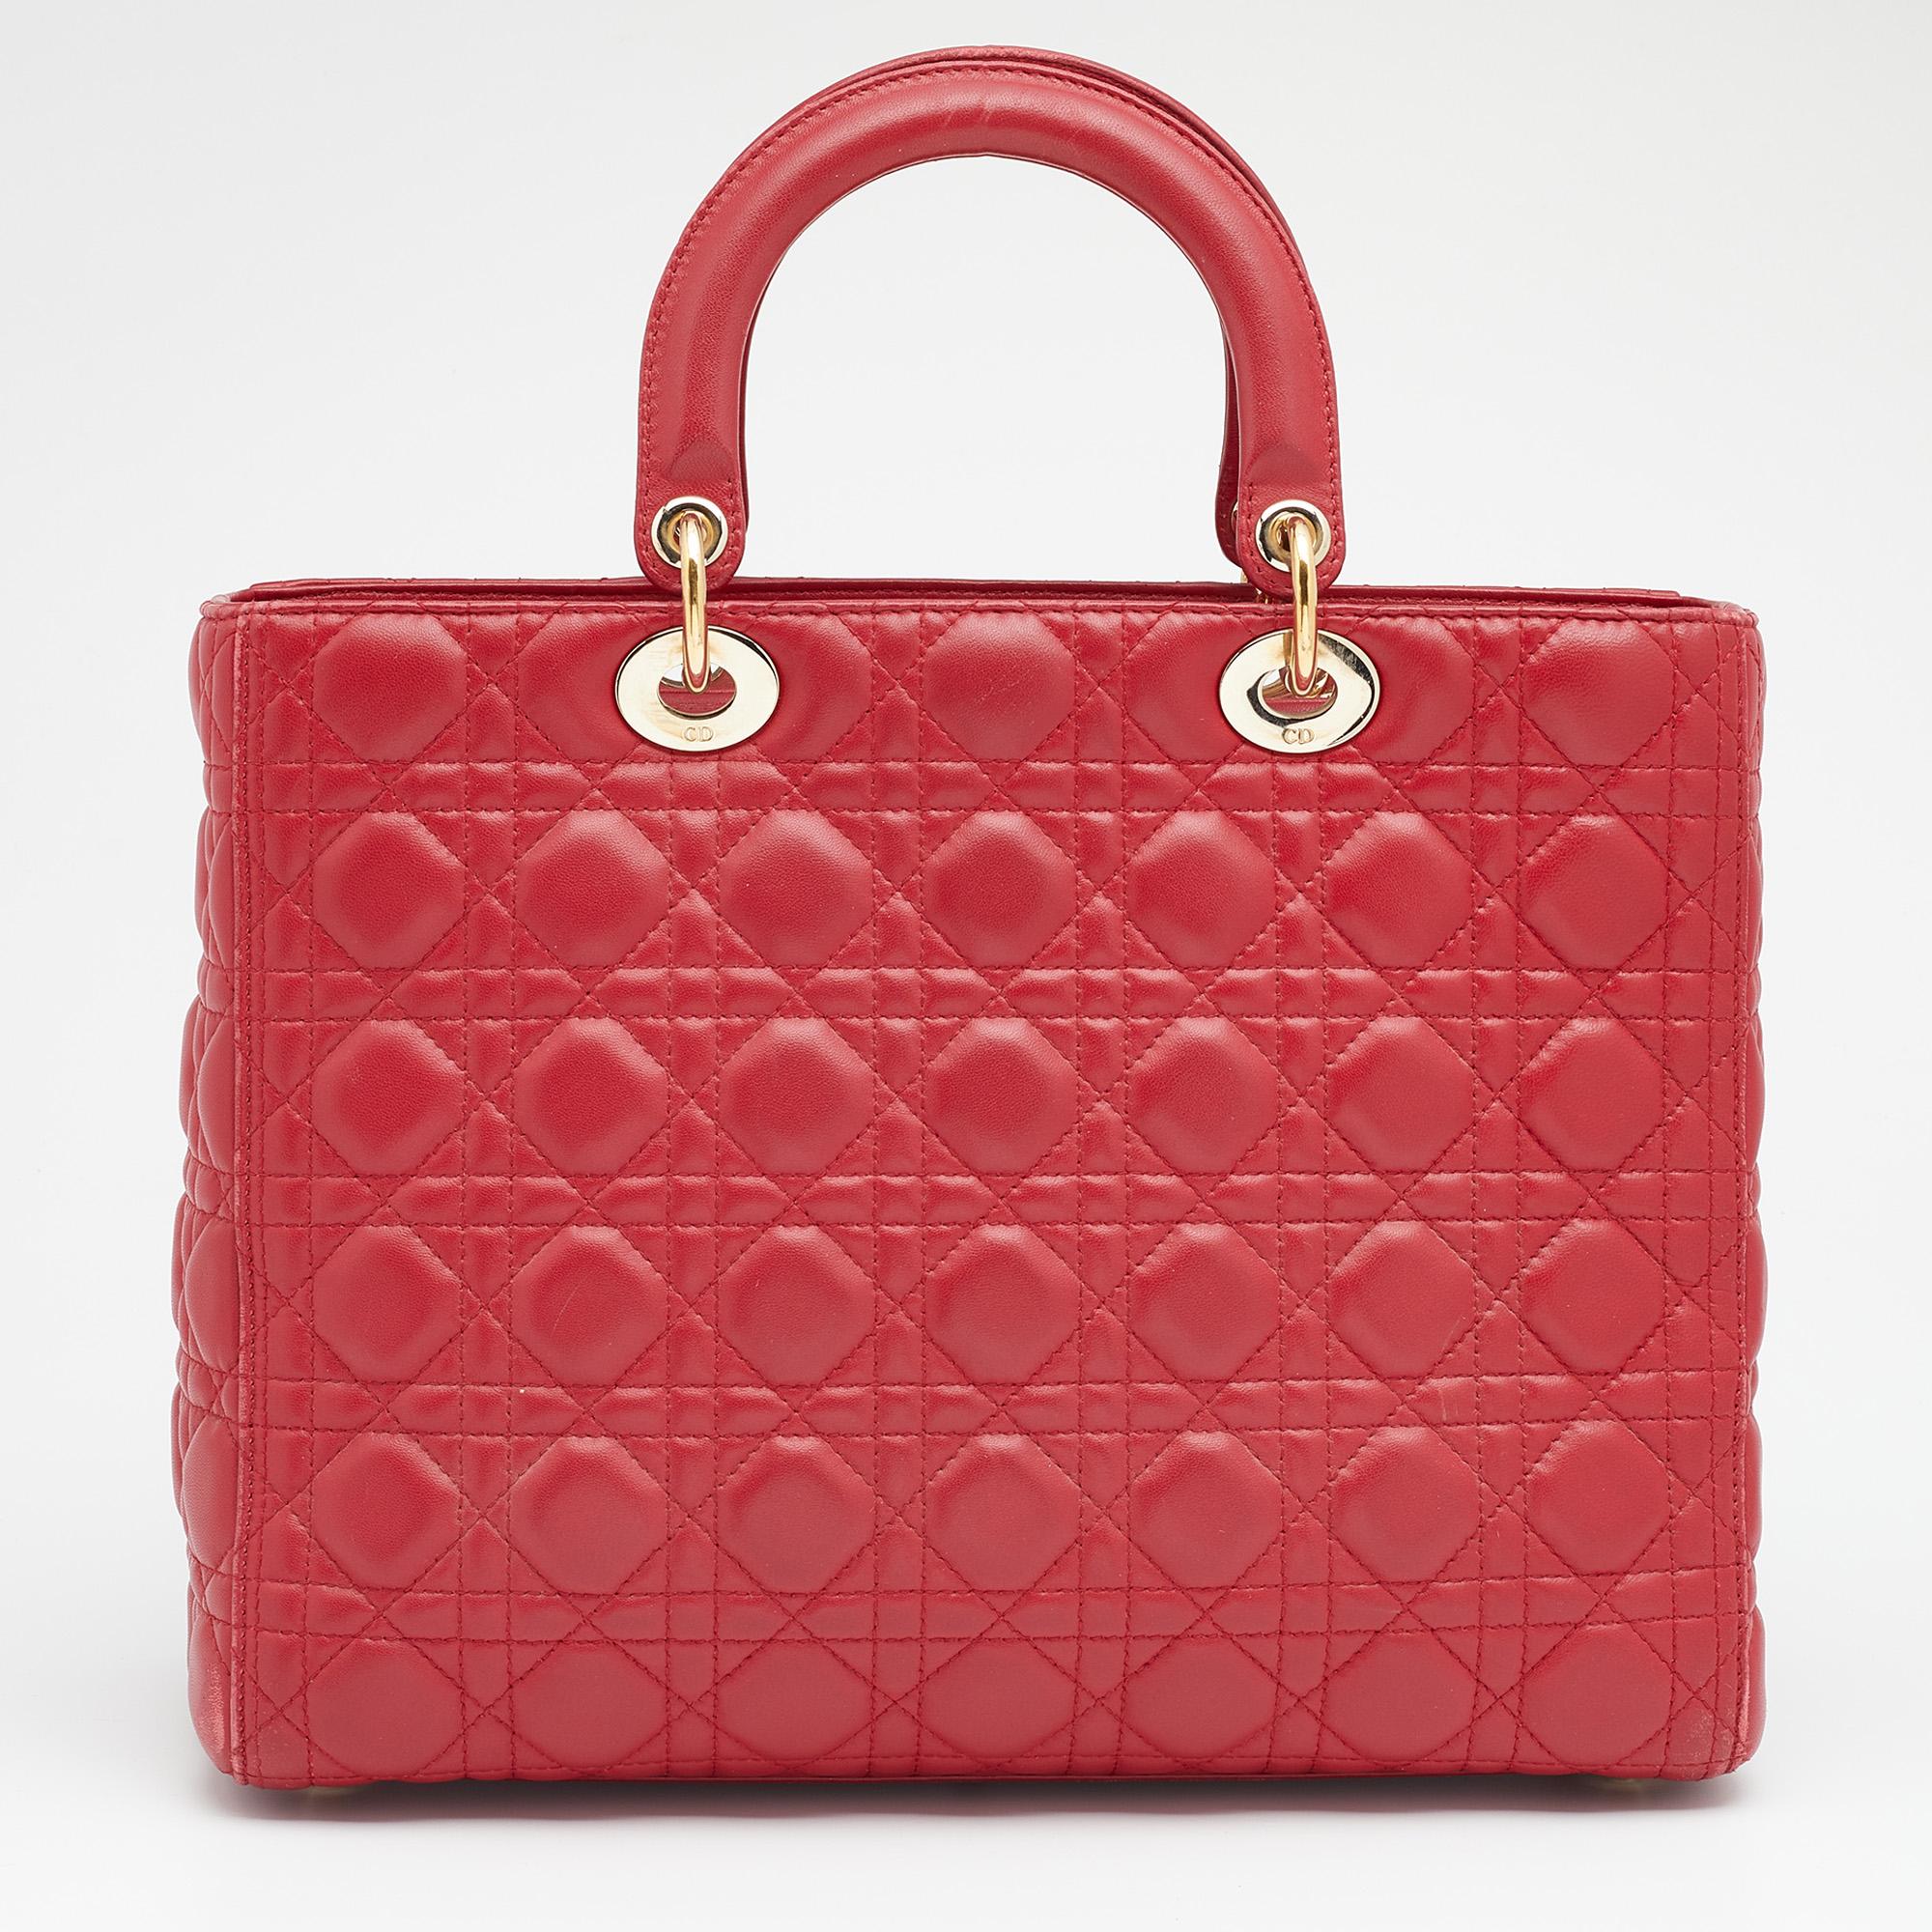 The Lady Dior tote is a Dior creation that has gained wide recognition and is a coveted bag that every fashionista craves to possess. The red tote has been crafted from leather and carries the signature Cannage quilt. It is equipped with a fabric